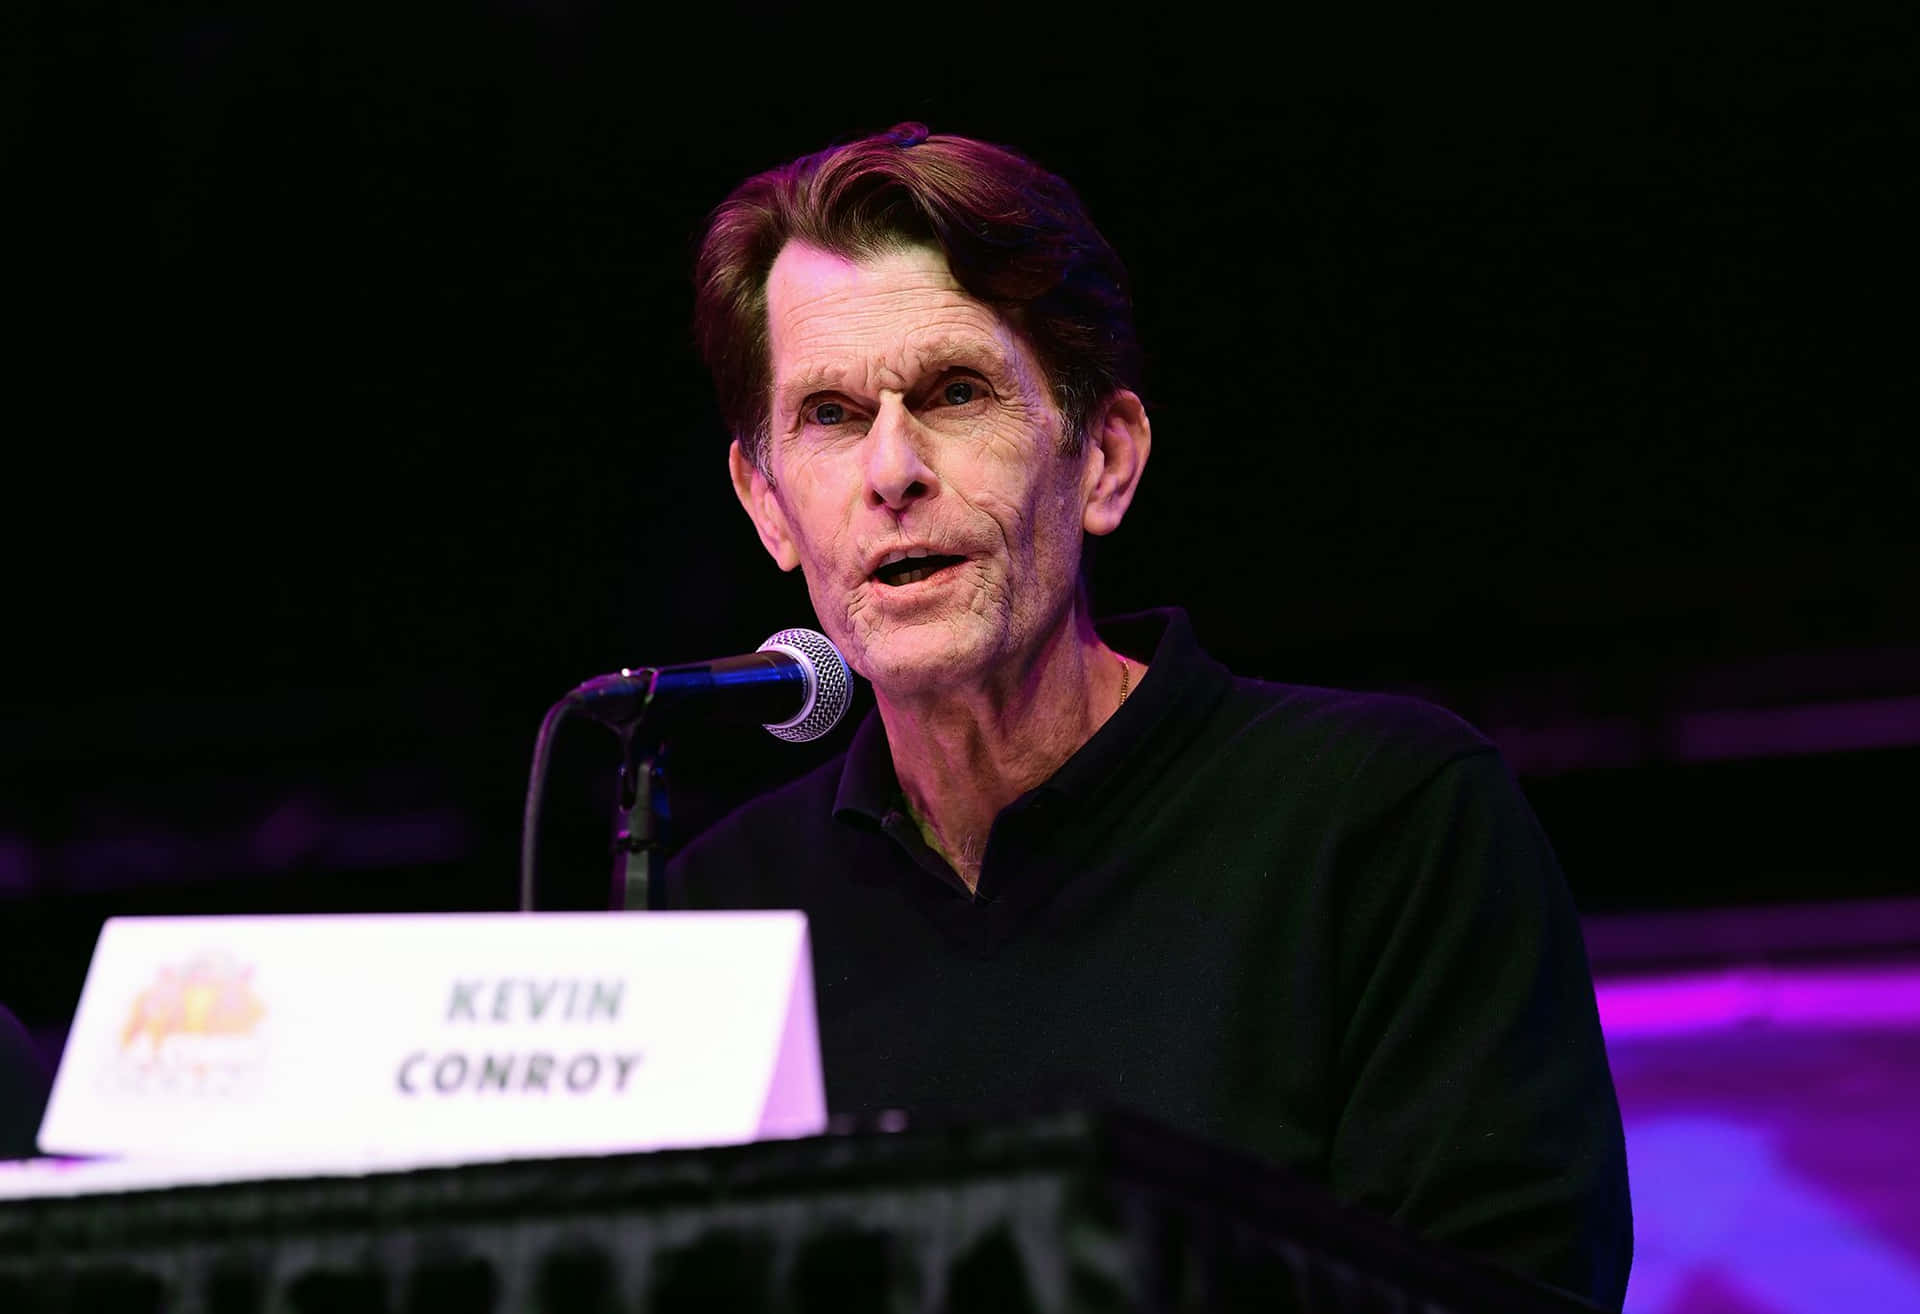 Kevin Conroy attending an event Wallpaper